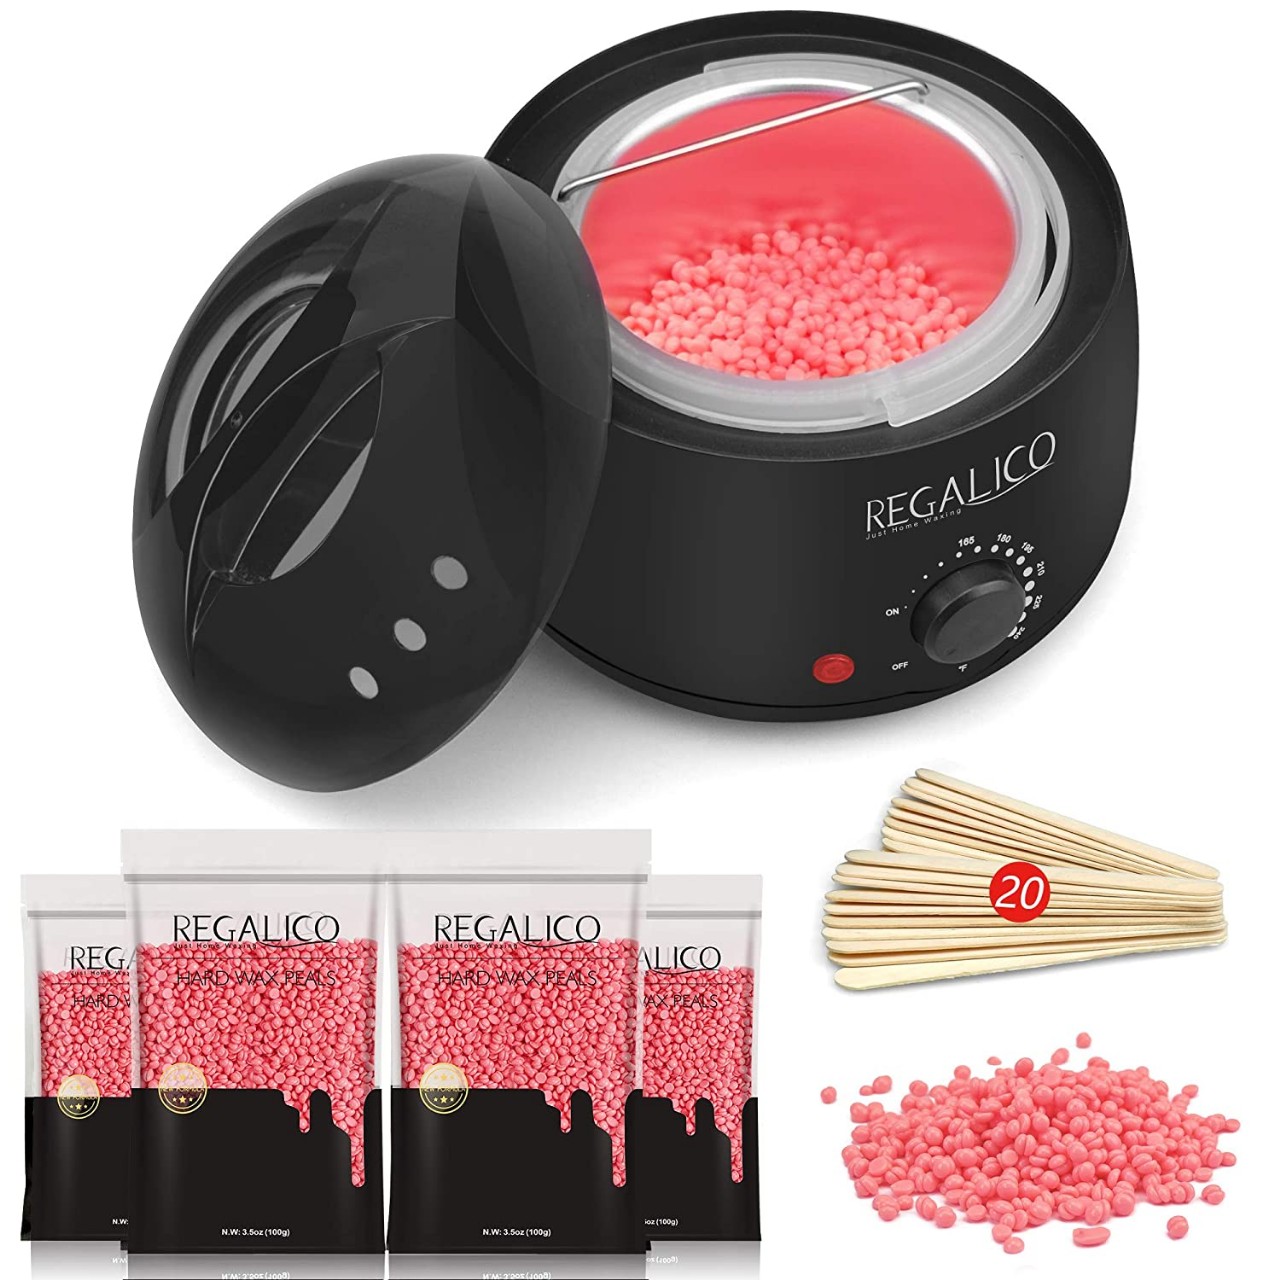 Waxing Kit for Women, Regalico Wax Warmer with 4 Bags Painless Hard Wax Beans Hair Removal Kit